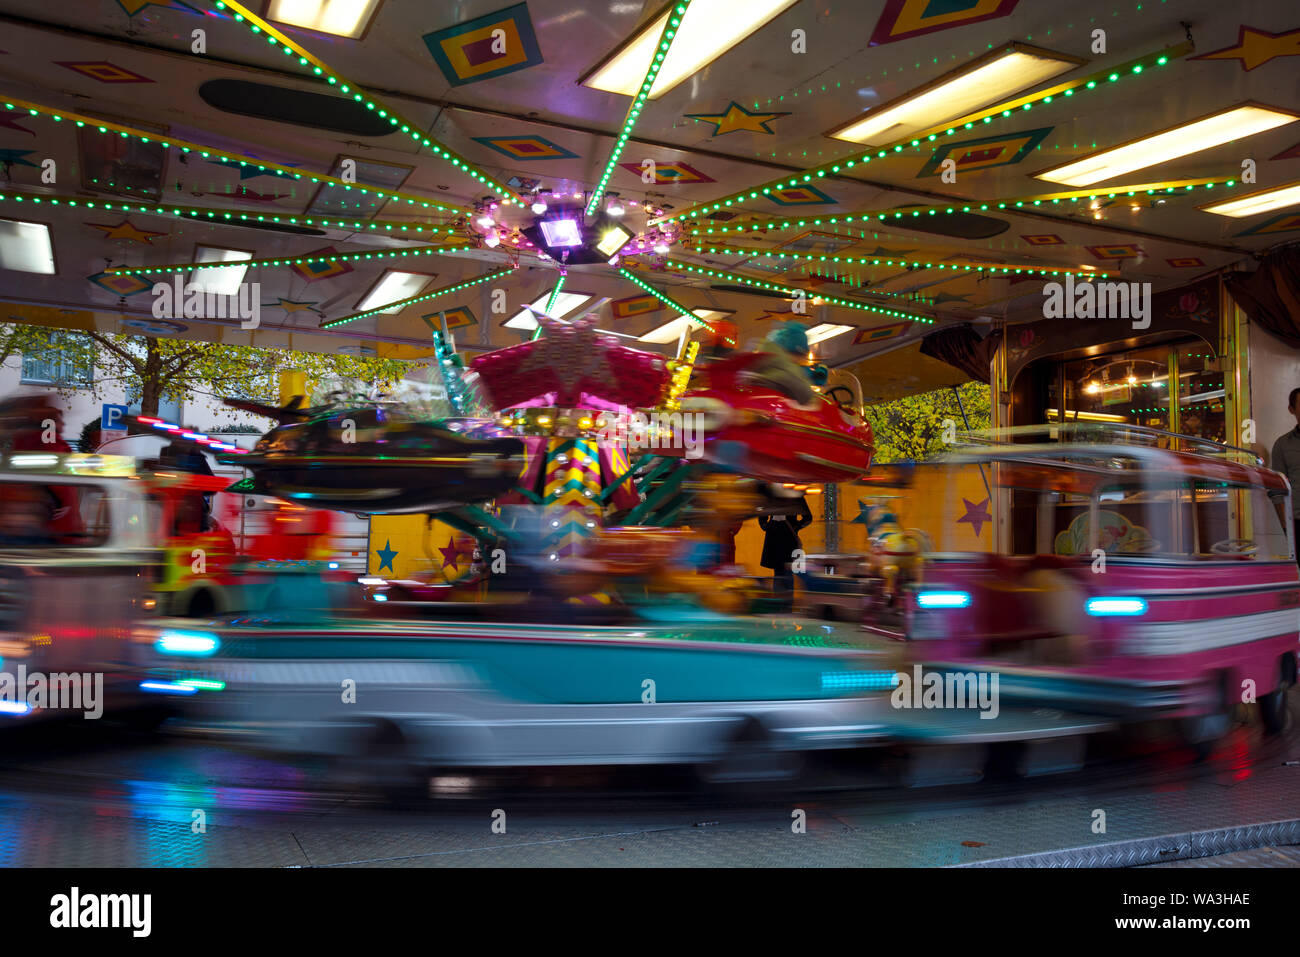 children's carousel with cars and planes at the christmas funfair market, long time exposure with blurred motion, abstract background, copy space Stock Photo